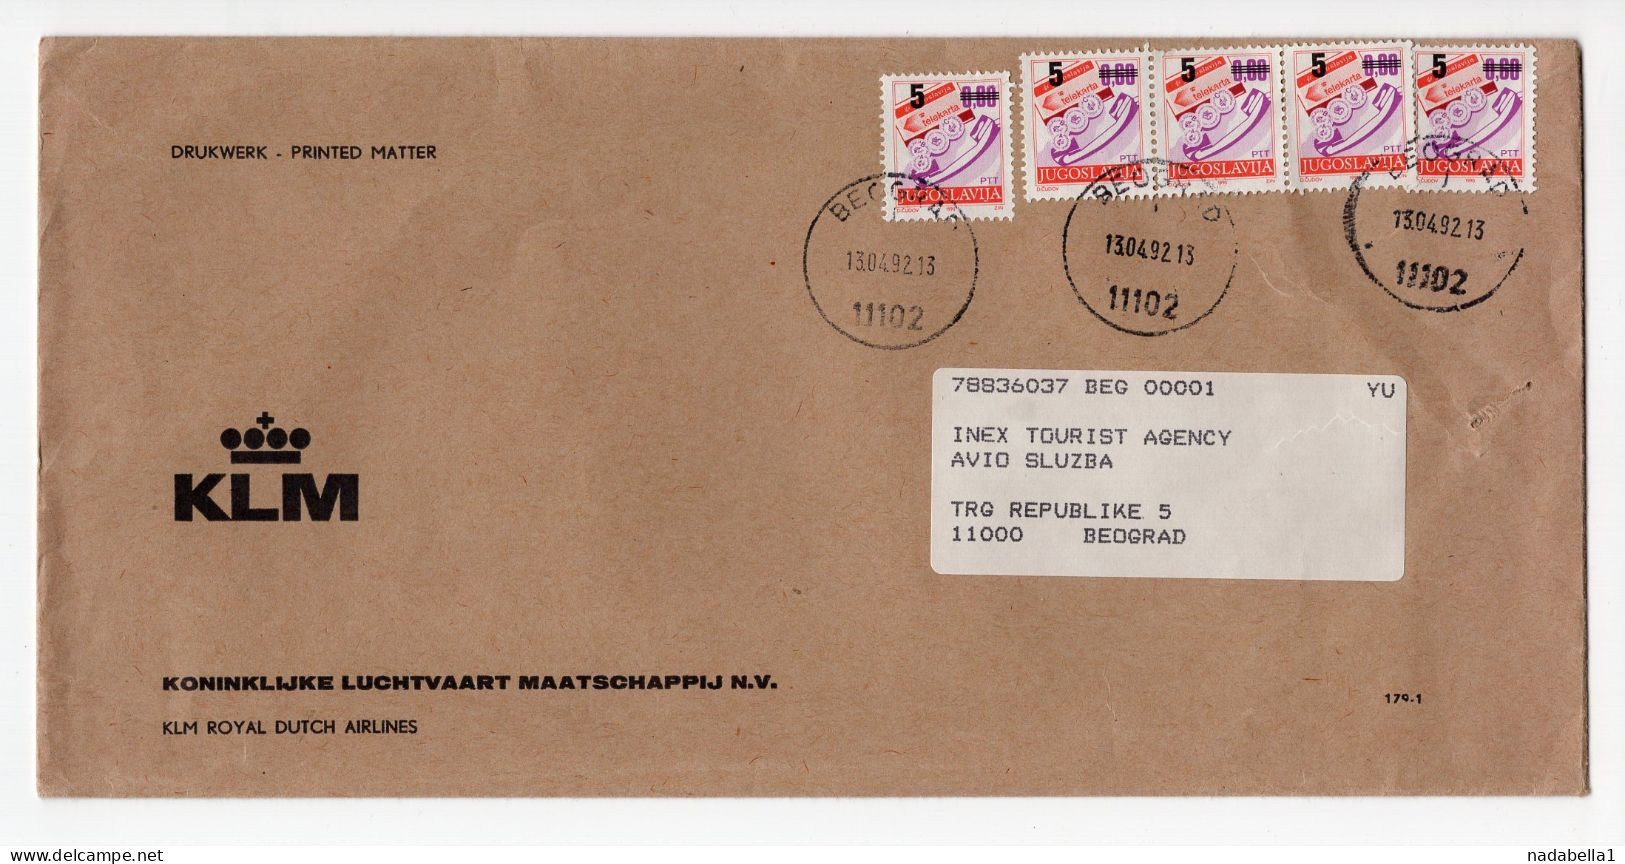 1992. YUGOSLAVIA,SERBIA,BELGRADE LOCO,KLM AIRLINE HEADED COVER,PRINTED MATTER,5 X 0.60 D. OVERPRINTED,INFLATIO MAIL - Lettres & Documents